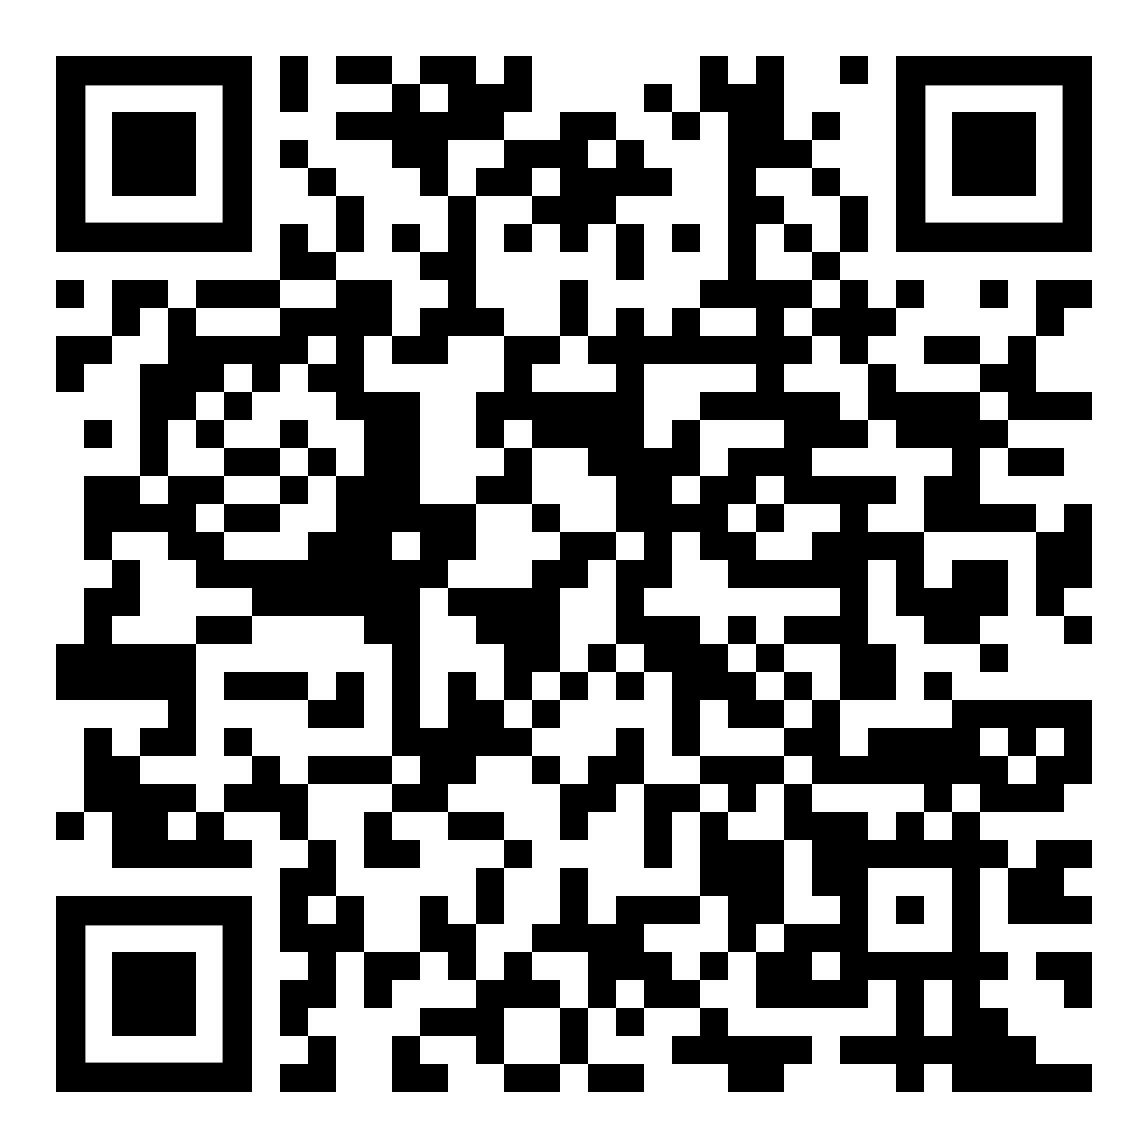 QR code to access the Zoom meeting